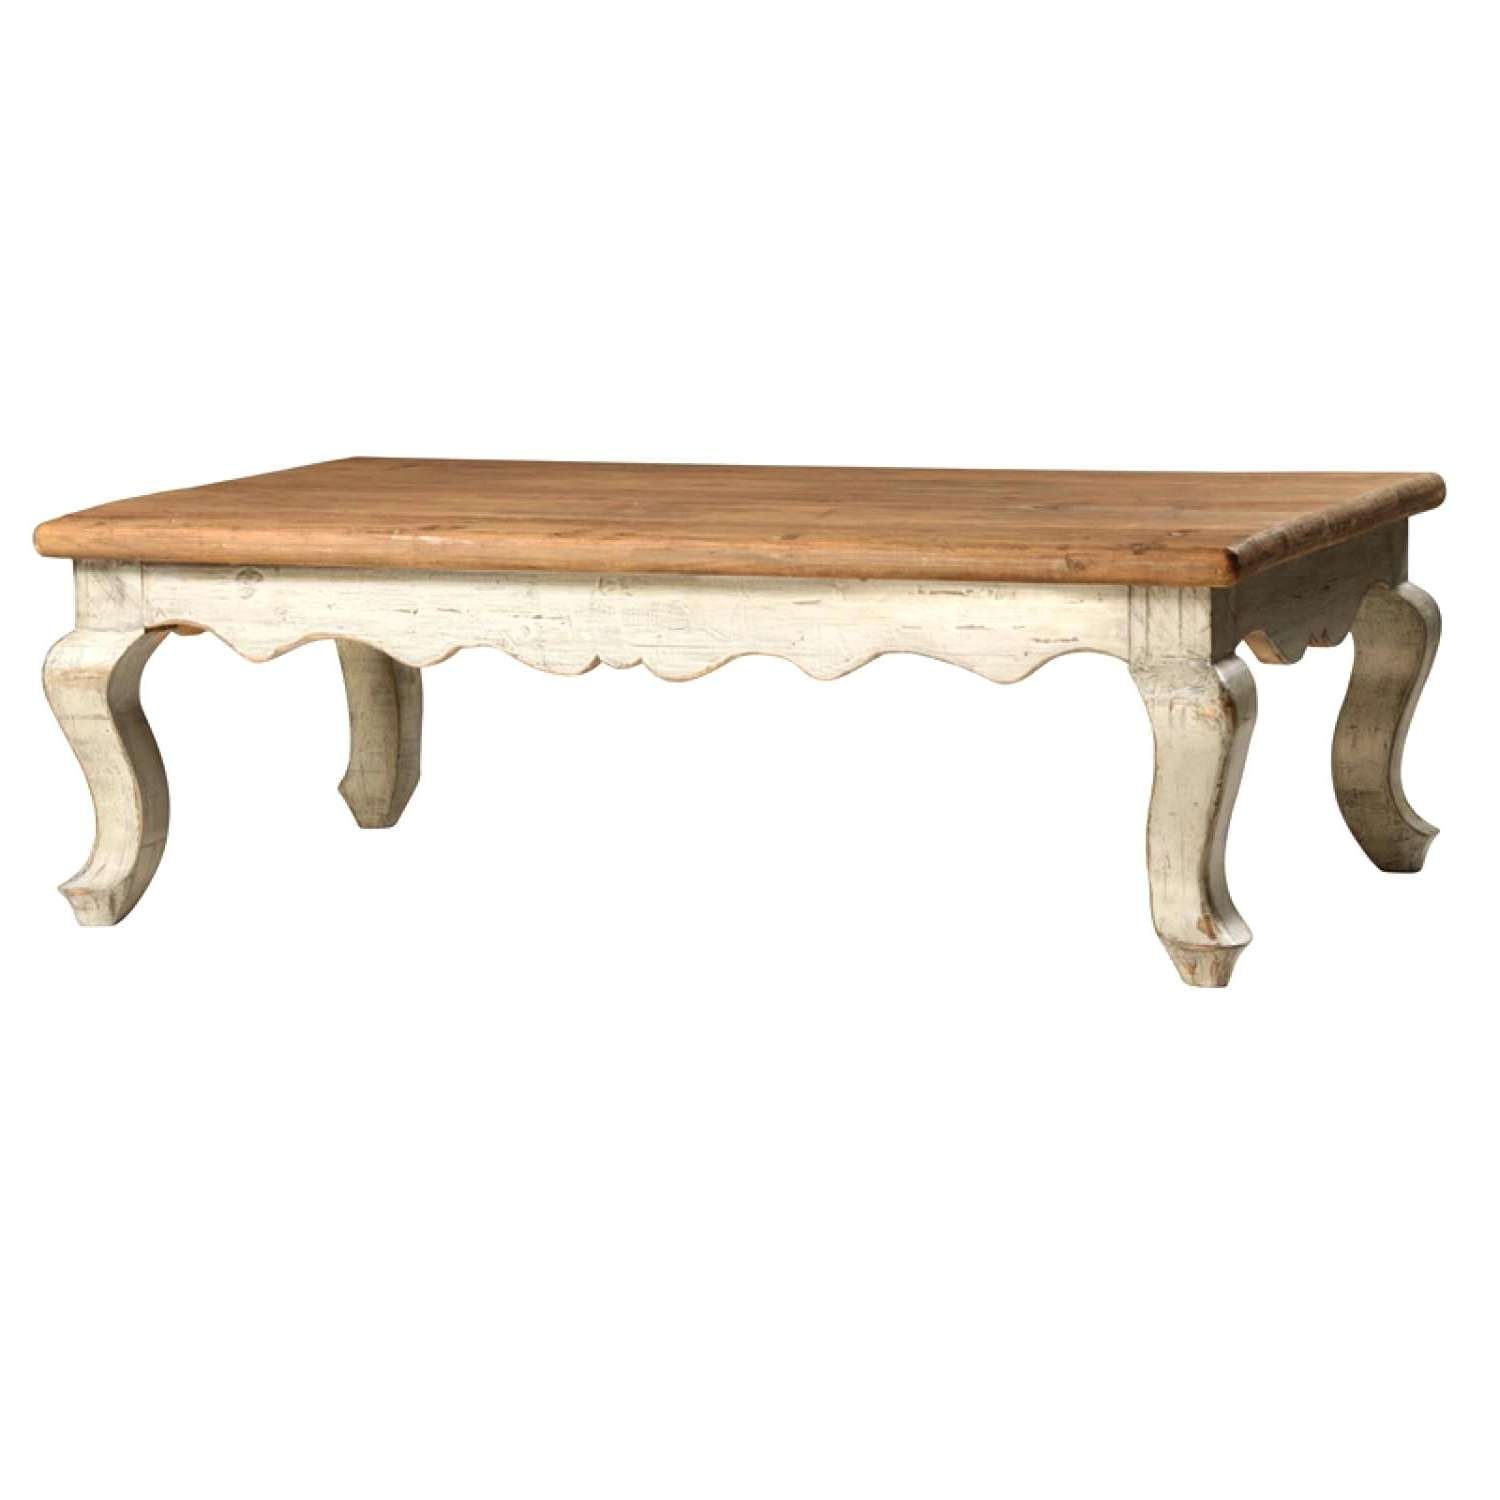 Most Popular White Cottage Style Coffee Tables Throughout Cottage Coffee Table Fit For Living Room A New Rustic Coastal (View 17 of 20)